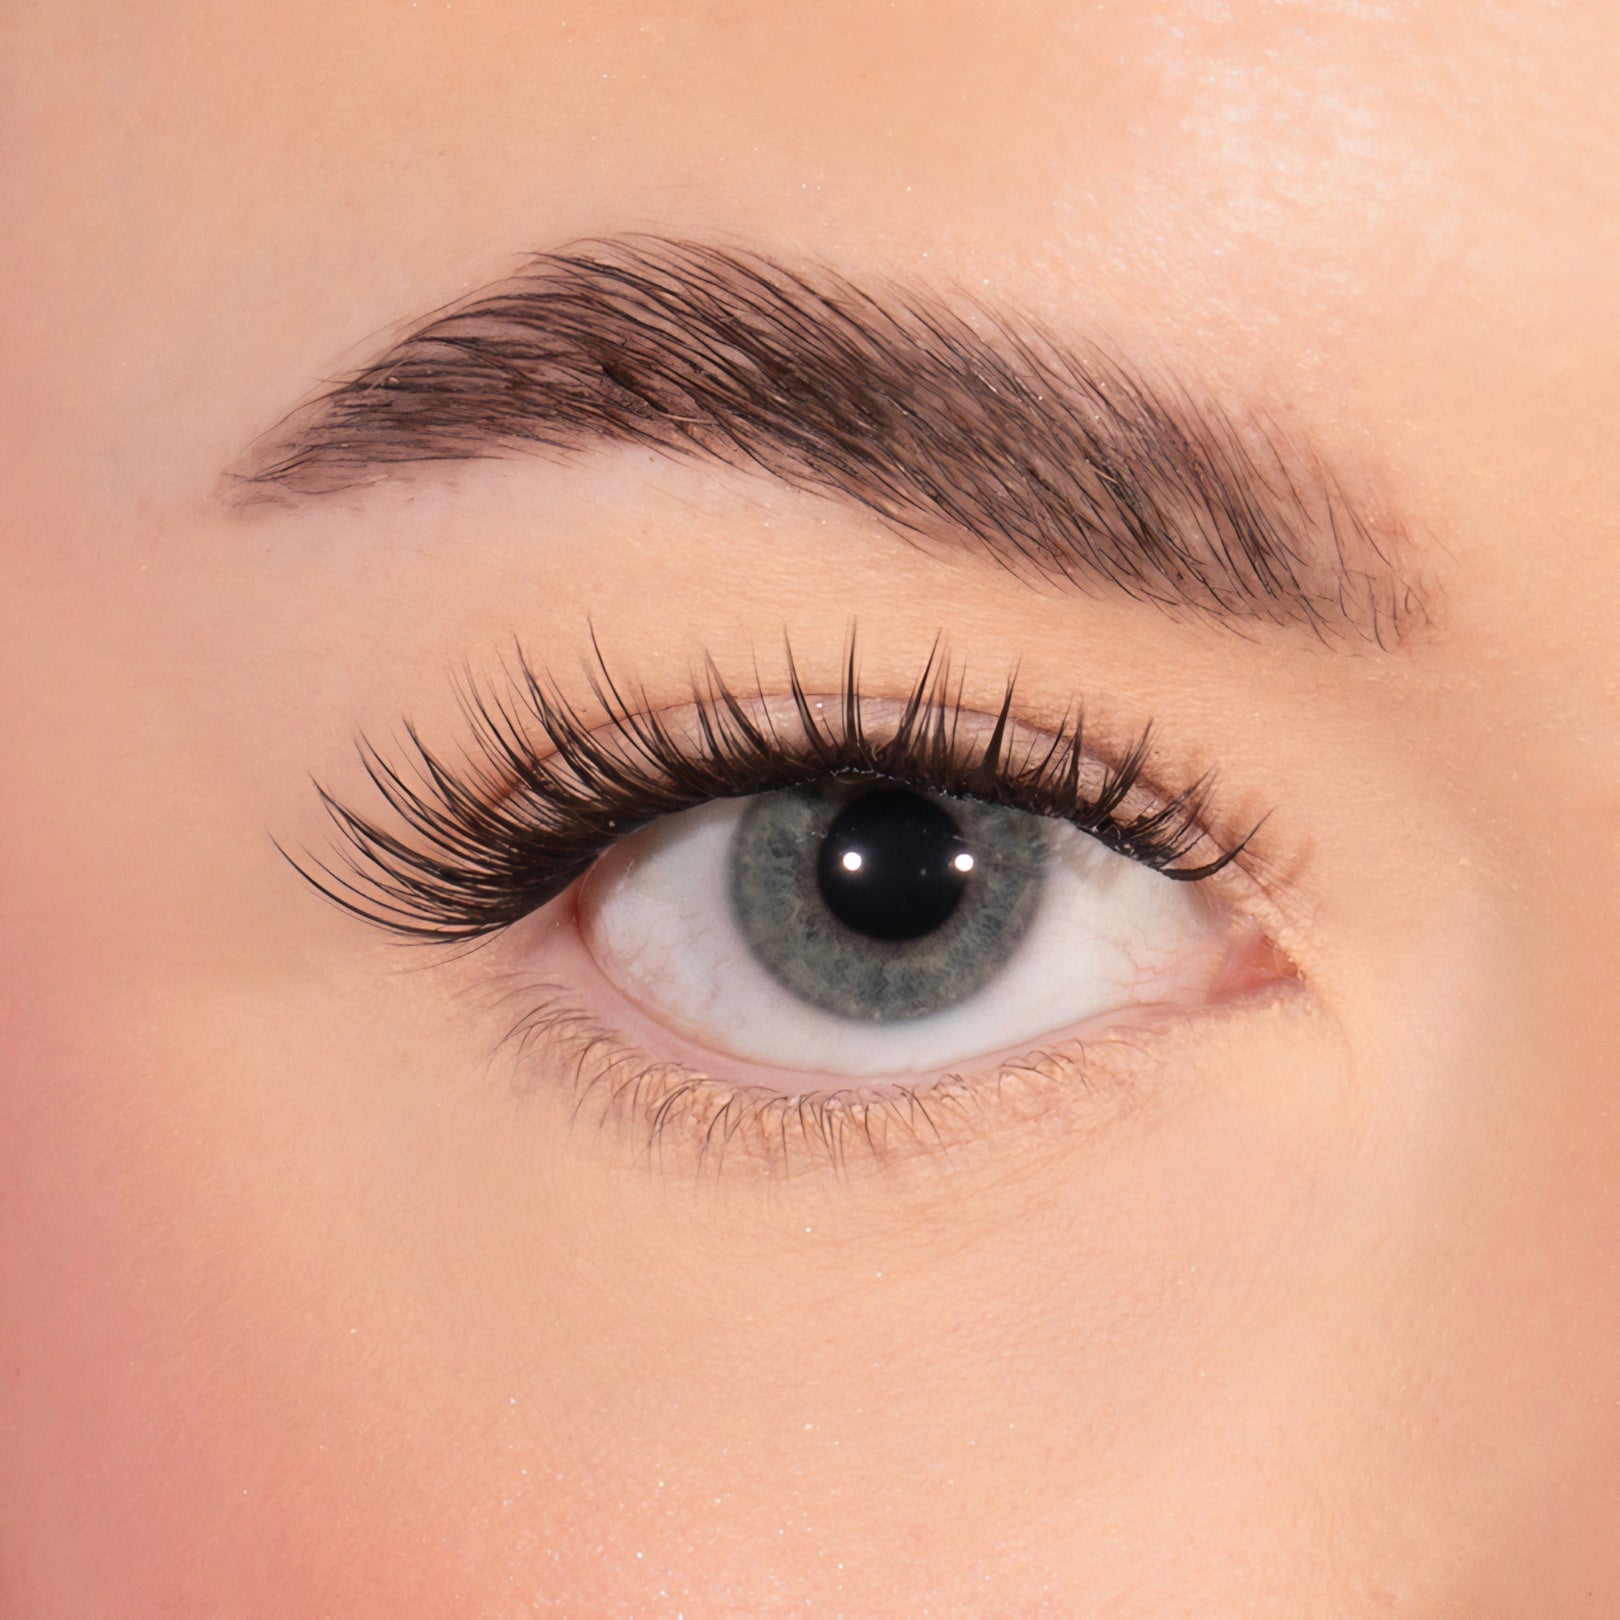 Defined Press-On Lashes